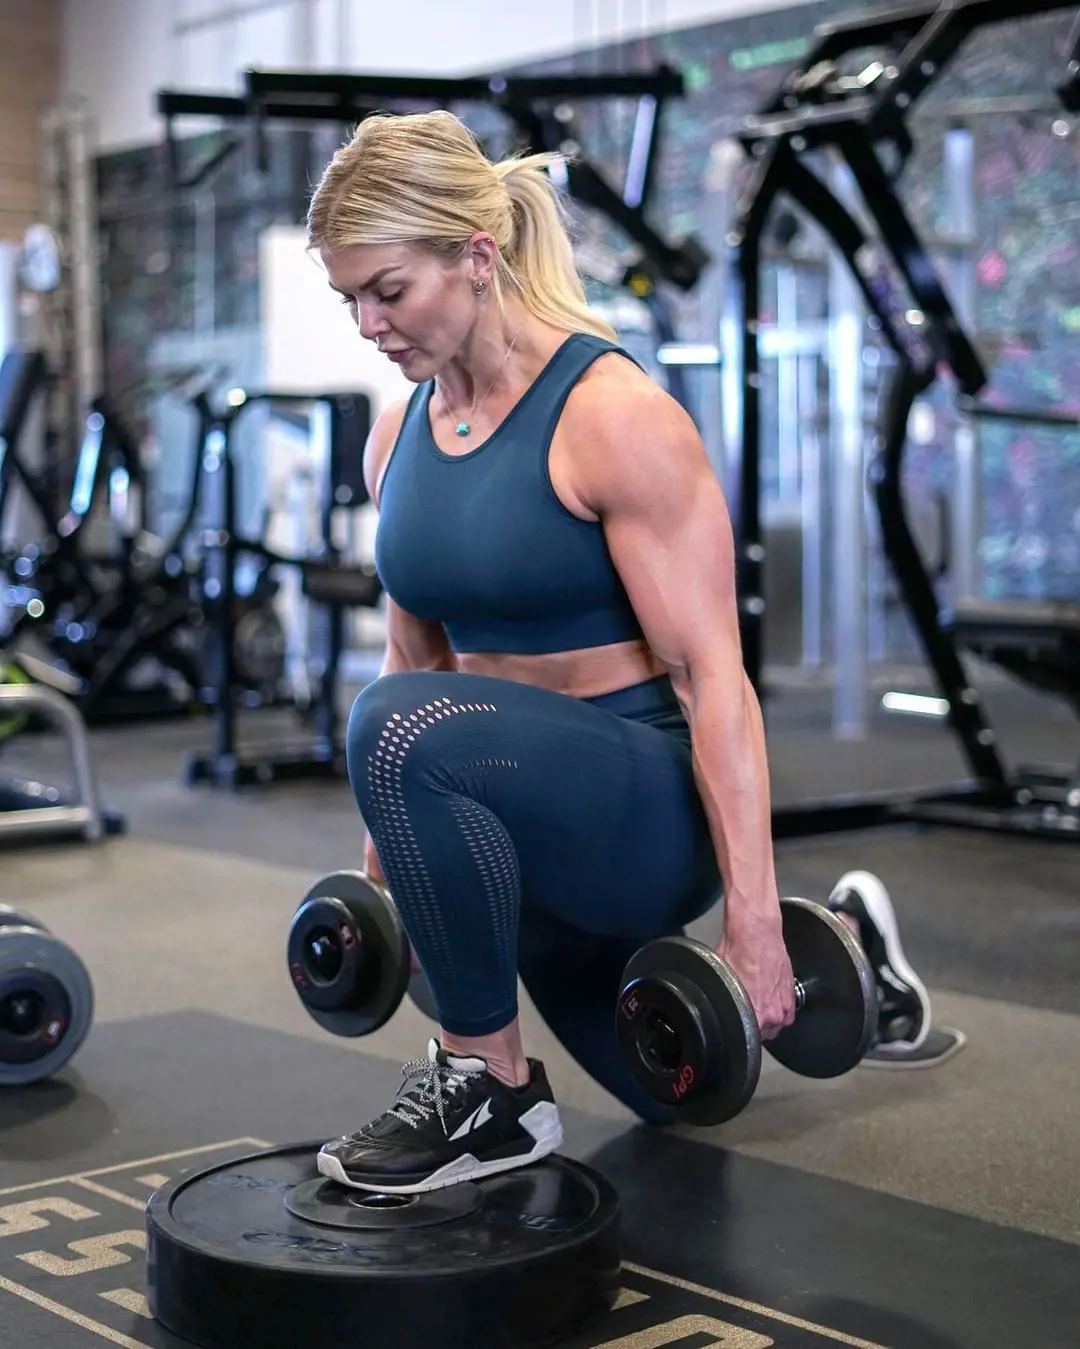 Brooke Ence performing Deficit Reverse Lunge holding two dumbbells in a gym in August 2021